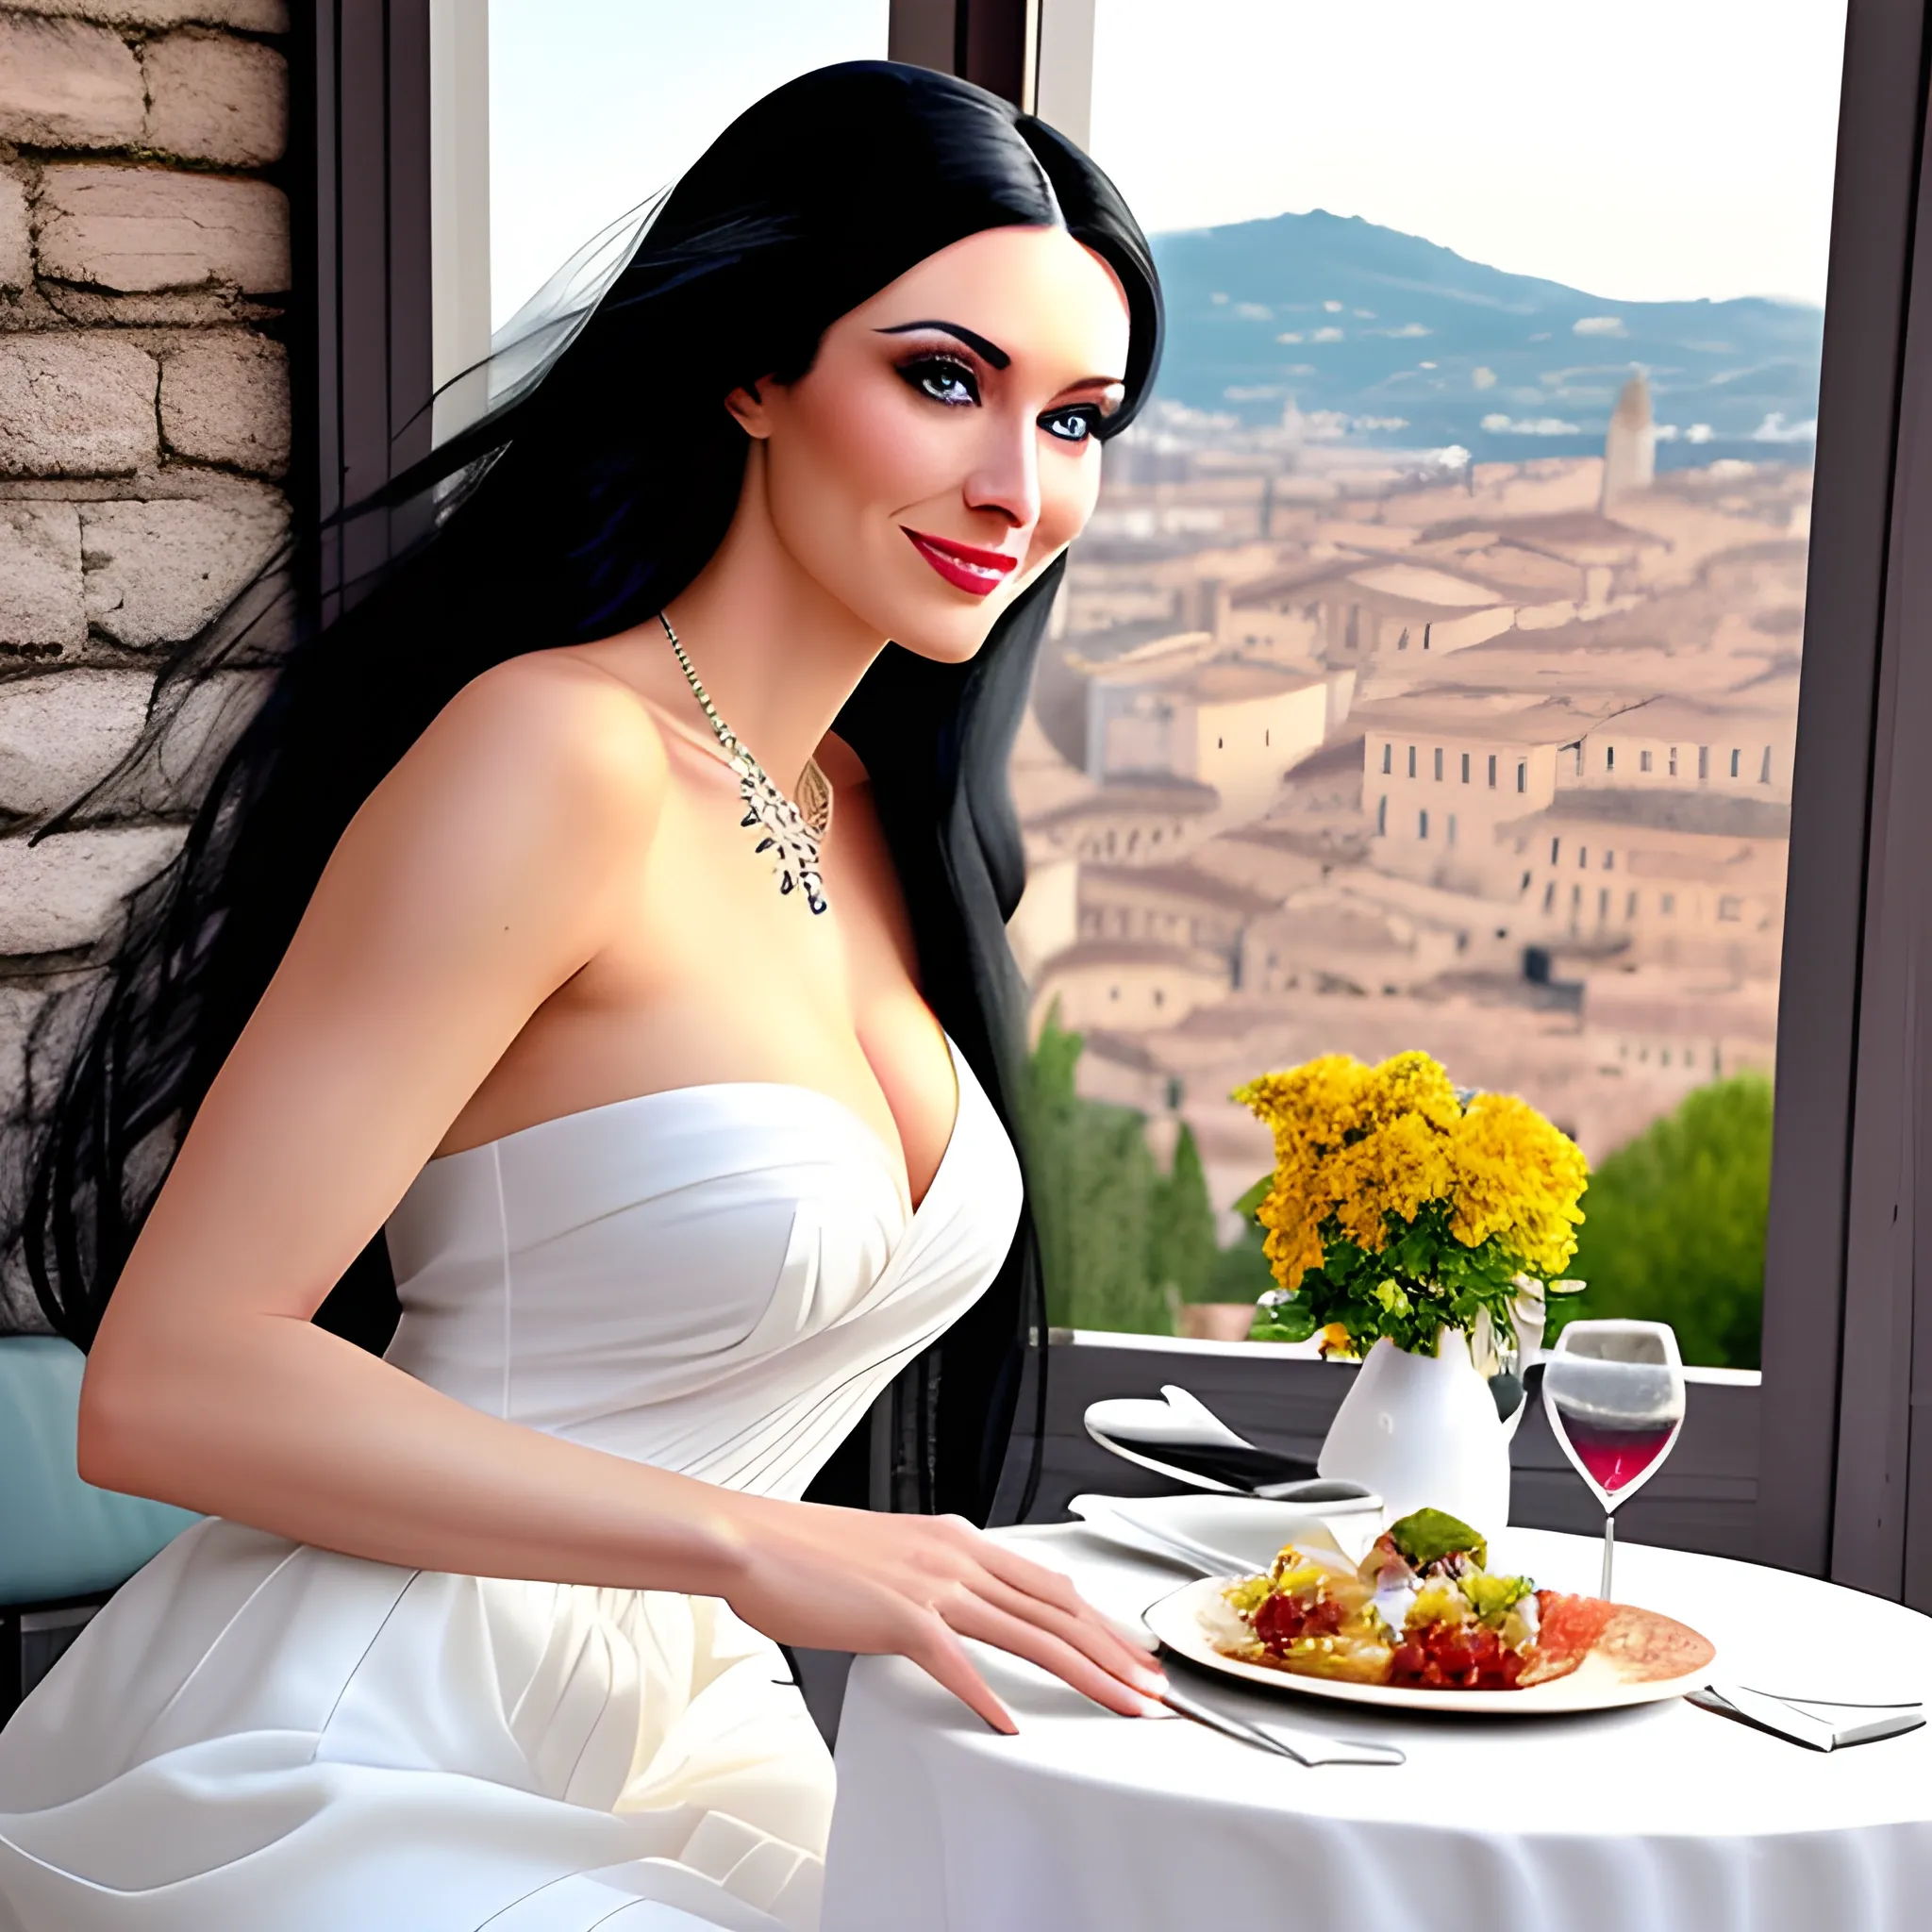 A full-body woman with BLACK long hair, flowing BLACK hair, and ICY BLUE eyes, smiling, sitting celebrating her birthday while holding a glass of wine as she poses at a Locanda Ai Portici restaurant by a restaurant window on a traditional restaurant terrace, Verona, Italy. she was holding a glass of wine as she poses at a restaurant by a window, a friendly atmosphere around flowers and rose wine. Dolce vita. girl with BLACK long hair, flowing BLACK hair, ICY BLUE eyes, and dimples, an image of a fitness woman a 31-year-old, she is beautiful and cute with full lips. She should have a natural expression. Body facing towards the camera, colored image, High quality, 8K Ultra HD, photorealistic portrait, The Picture is taken by a photographer in a studio-like atmosphere with the image should be elegantly clear, illuminated by the vibrant city lights background. long hair, with ambient light from the side, thin lips with gloss, fertile, sultry expression, hazy dreamy eyes, eyelids, blushing, half-open mouth, biting lip, light makeup, warm, moist, oily complexion, tanned skin beautiful, gorgeous. include an image depicting a scene of Verona and let yourself be inspired by the most beautiful photo ideas throughout Italy, Verona, spring, Verona, Italy. She was wearing a white casual dress and a pearl necklace. feminine pose in a field. energy-filled illustrations. Italy glamour, clear background, looking directly into the frame, holding the glass in the left hand and the right on the table, the fingers should be clear, not too long and should be close to each other, the nails should be painted with pink Clare nail polish.